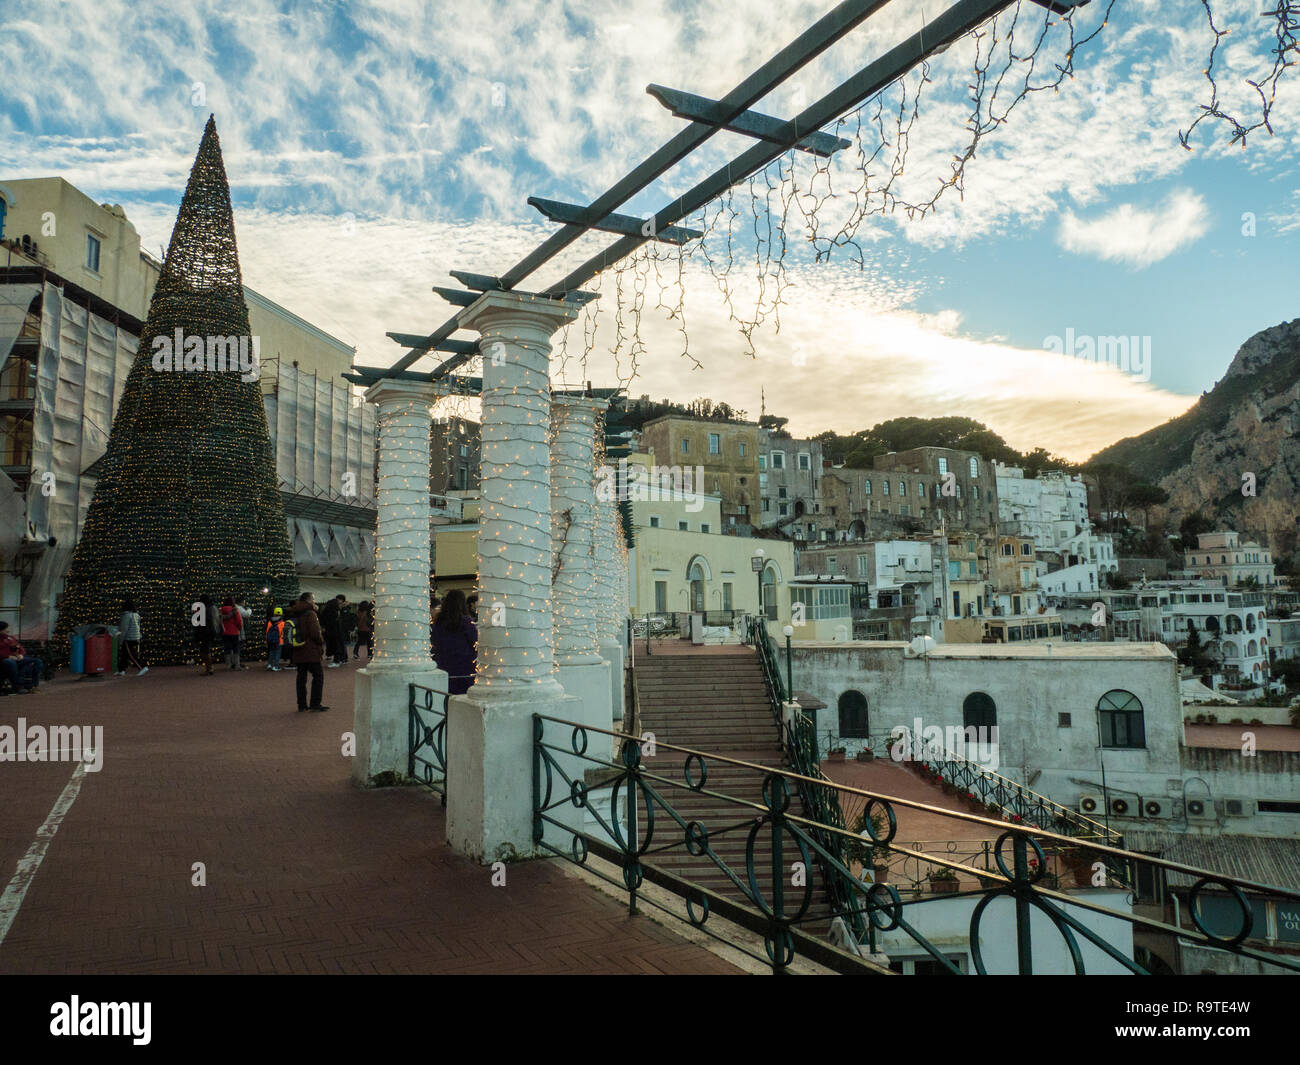 Capri town at Christmas time on the Island of Capri in the region of Campania, Italy Stock Photo